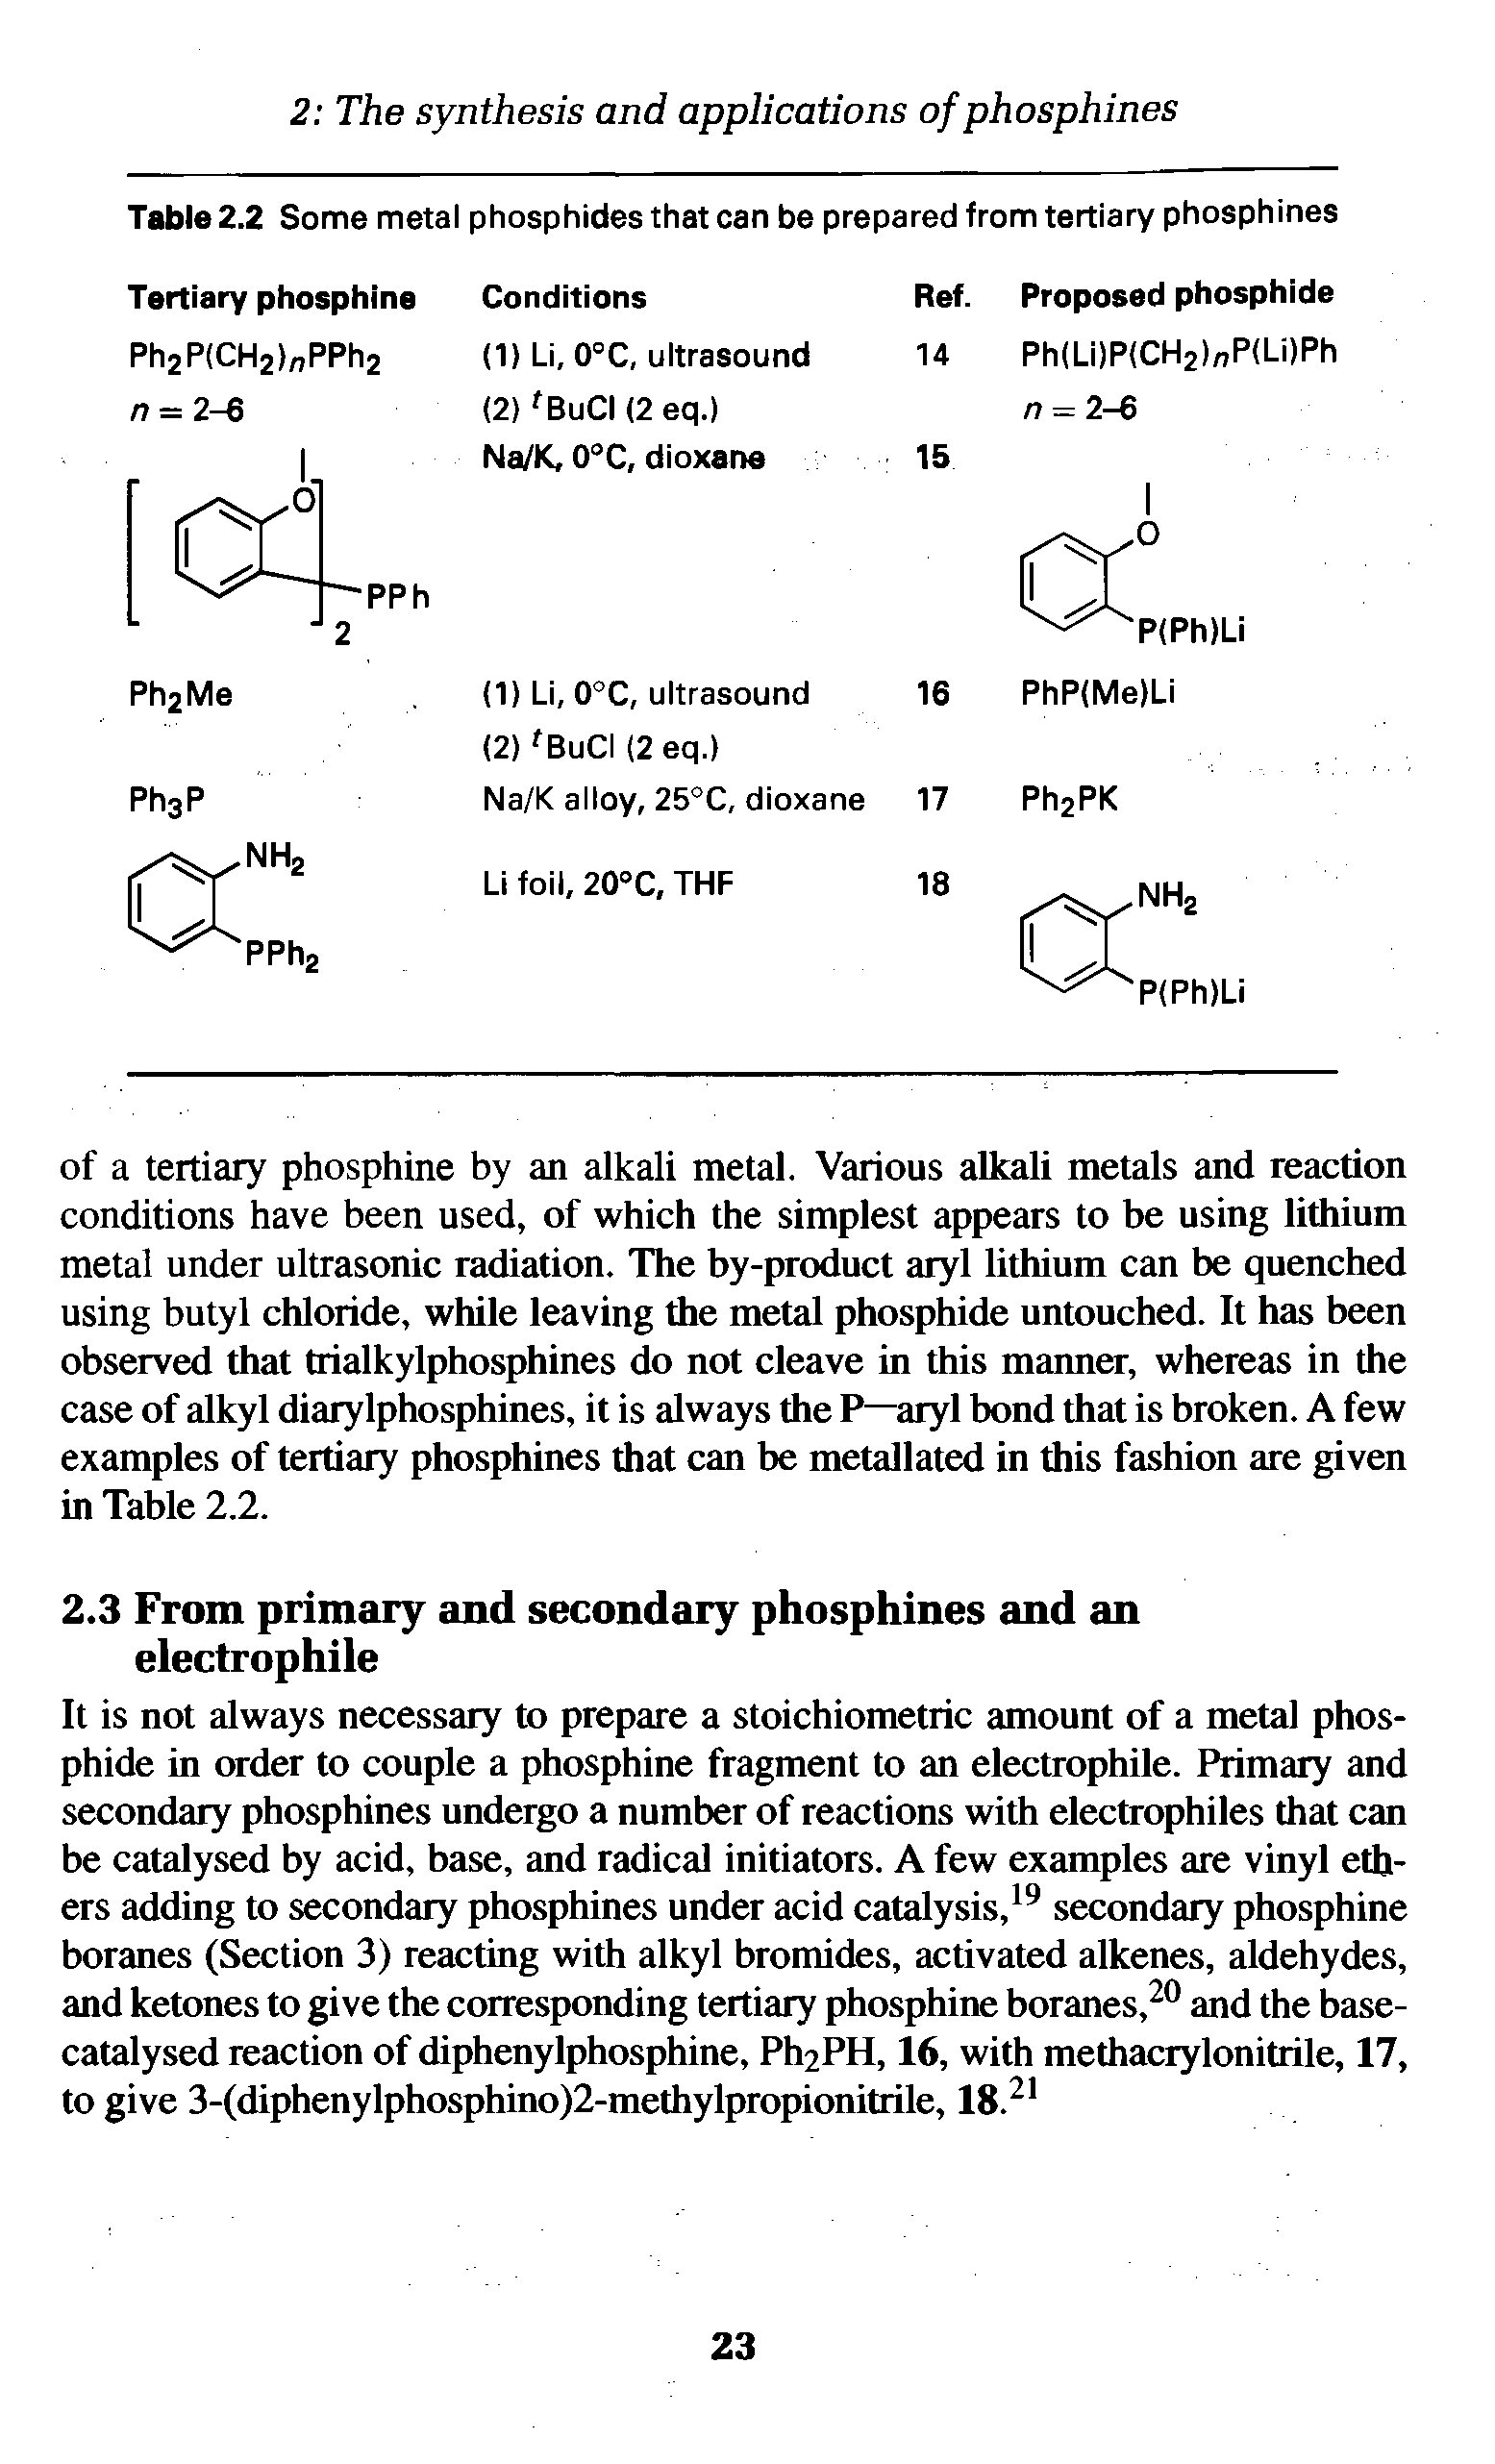 Table 2.2 Some metal phosphides that can be prepared from tertiary phosphines...